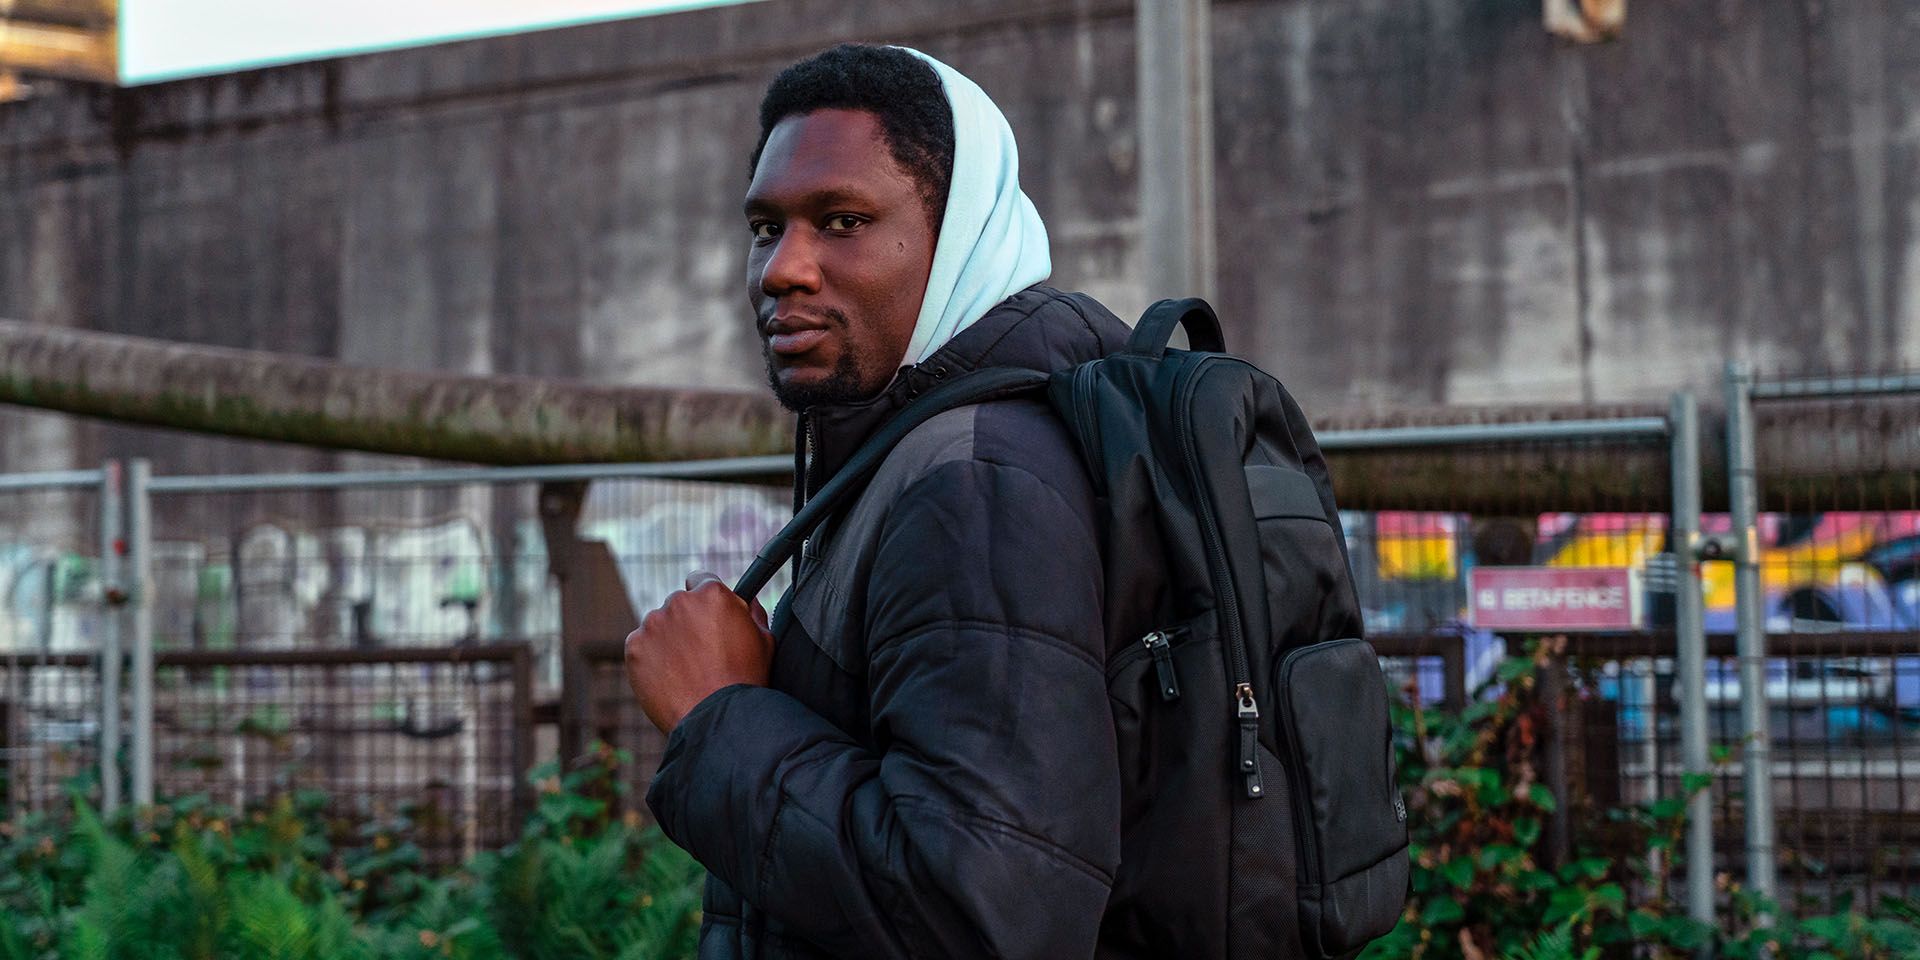 A man stands in a city environment with a black Case Logic backpack.